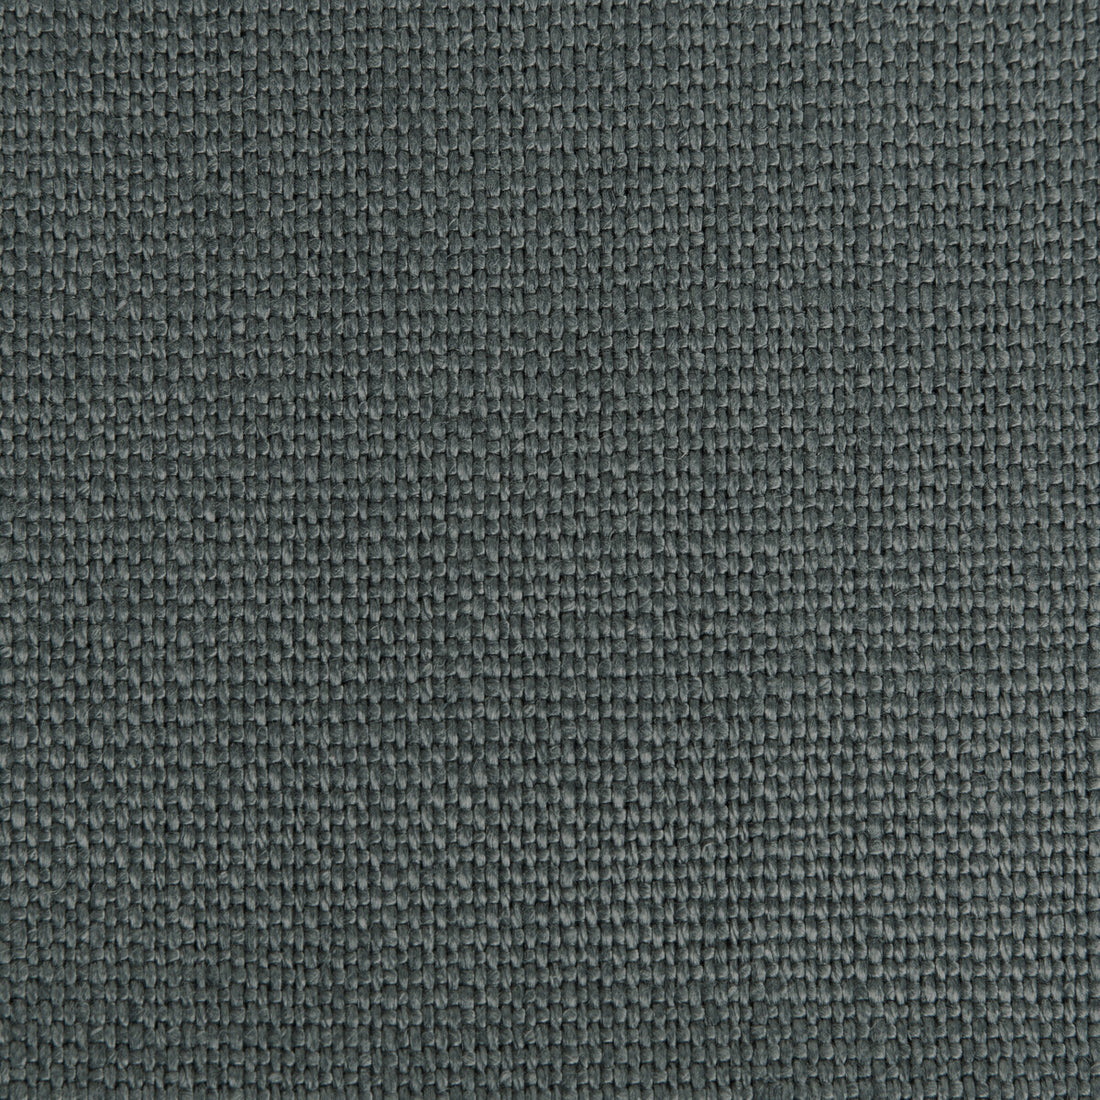 Hampton Linen fabric in bluestone color - pattern 2012171.521.0 - by Lee Jofa in the Colour Complements II collection